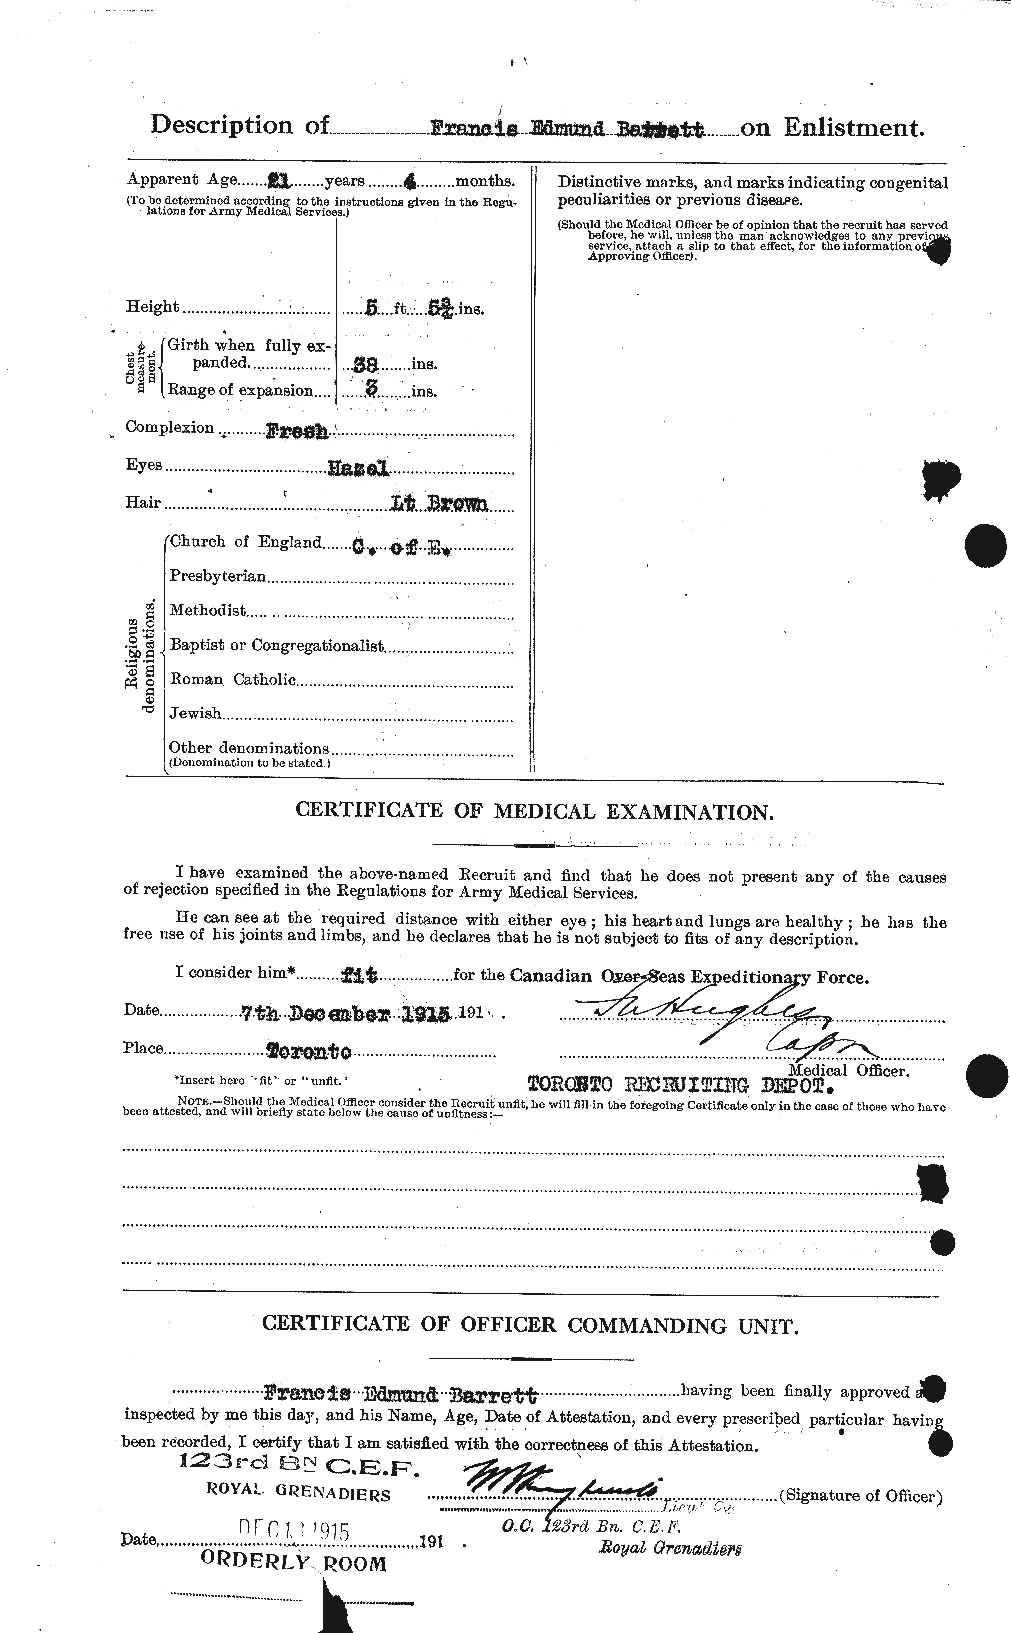 Personnel Records of the First World War - CEF 220337b